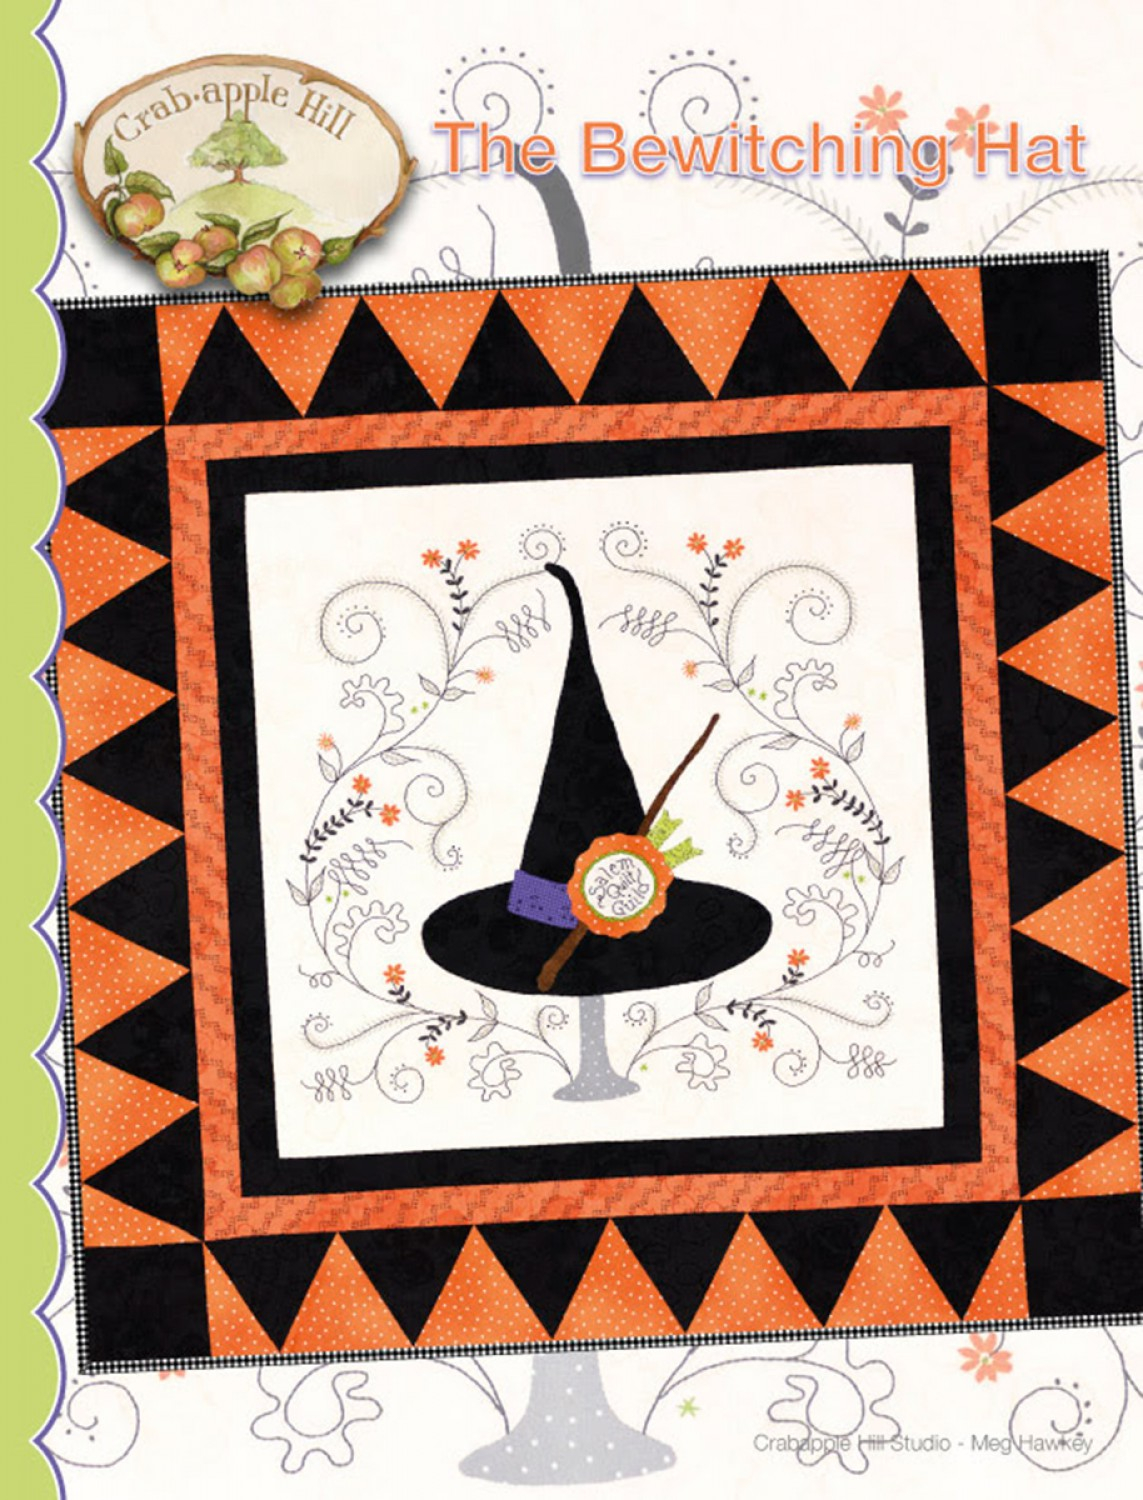 Crabapple Hill Embroidery Patterns The Bewitching Hat Embroidery Pattern Crab Apple Hill